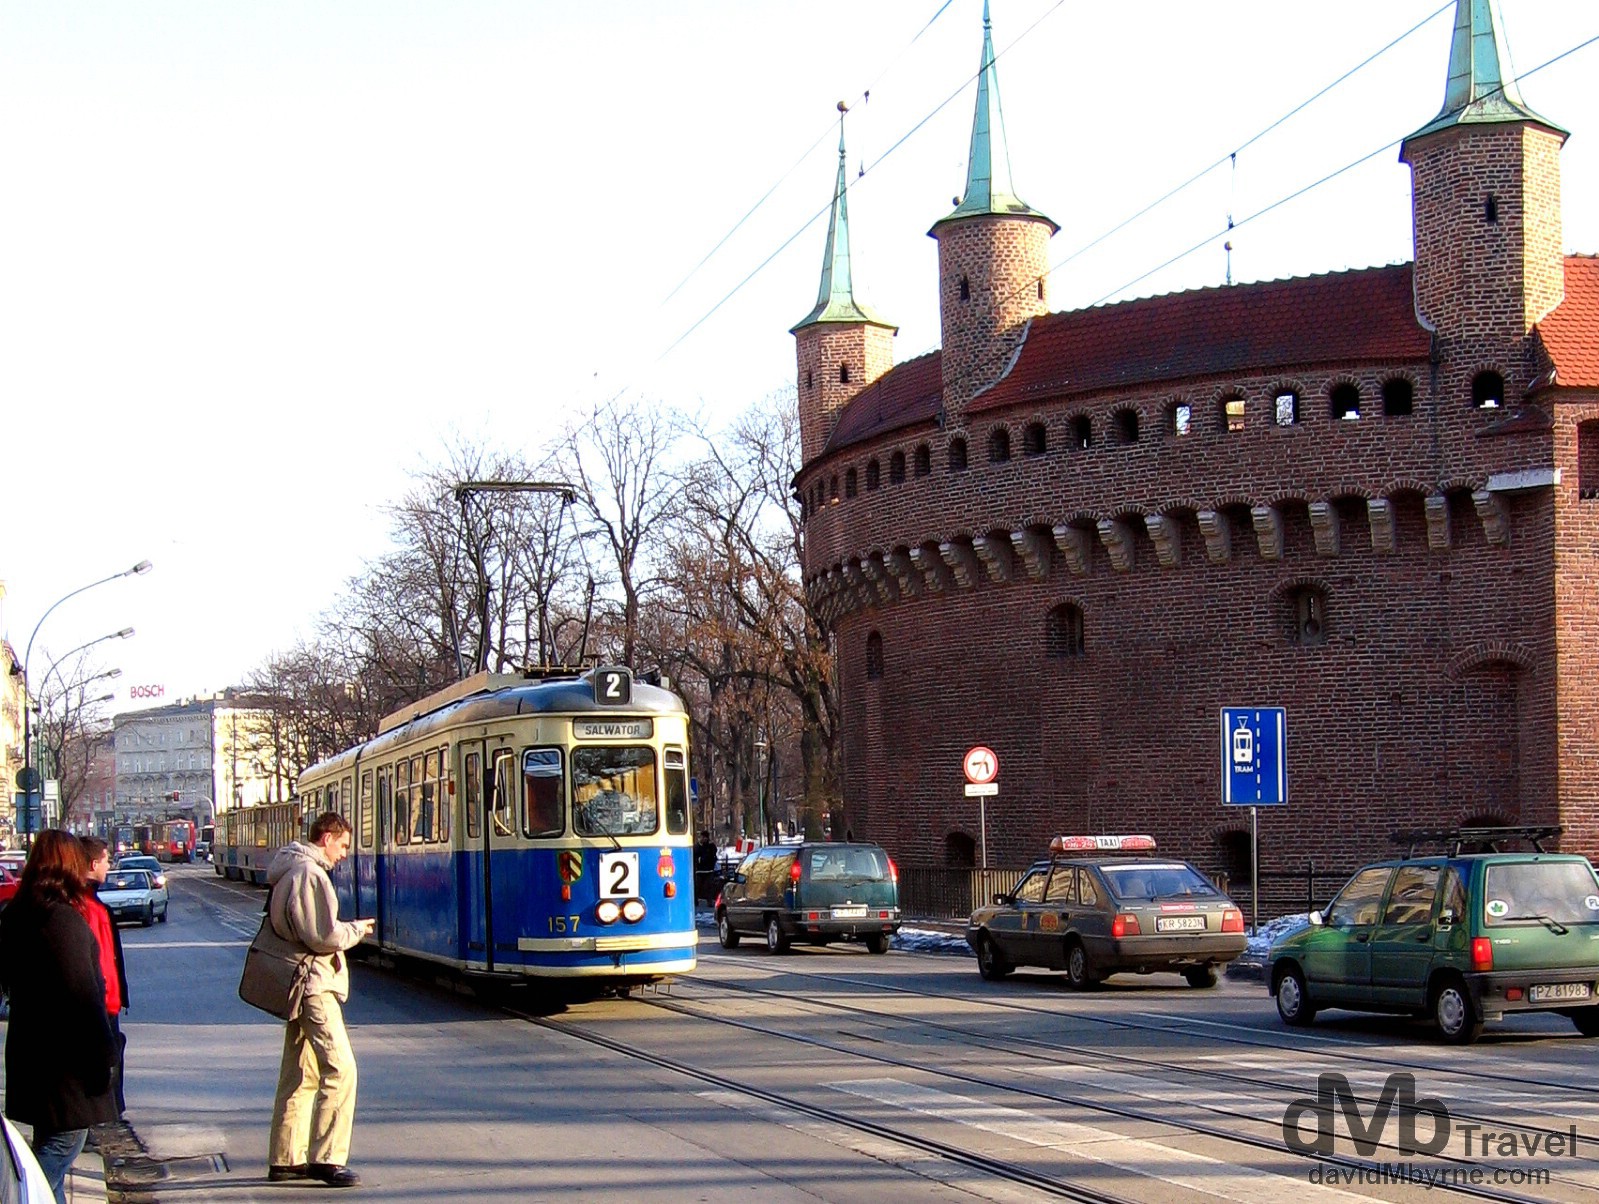 A tram plying the street fronting the circular Barbican, a defensive bastion built in 1498 as an outer defense to the city of Krakow in Poland. March 6, 2006.